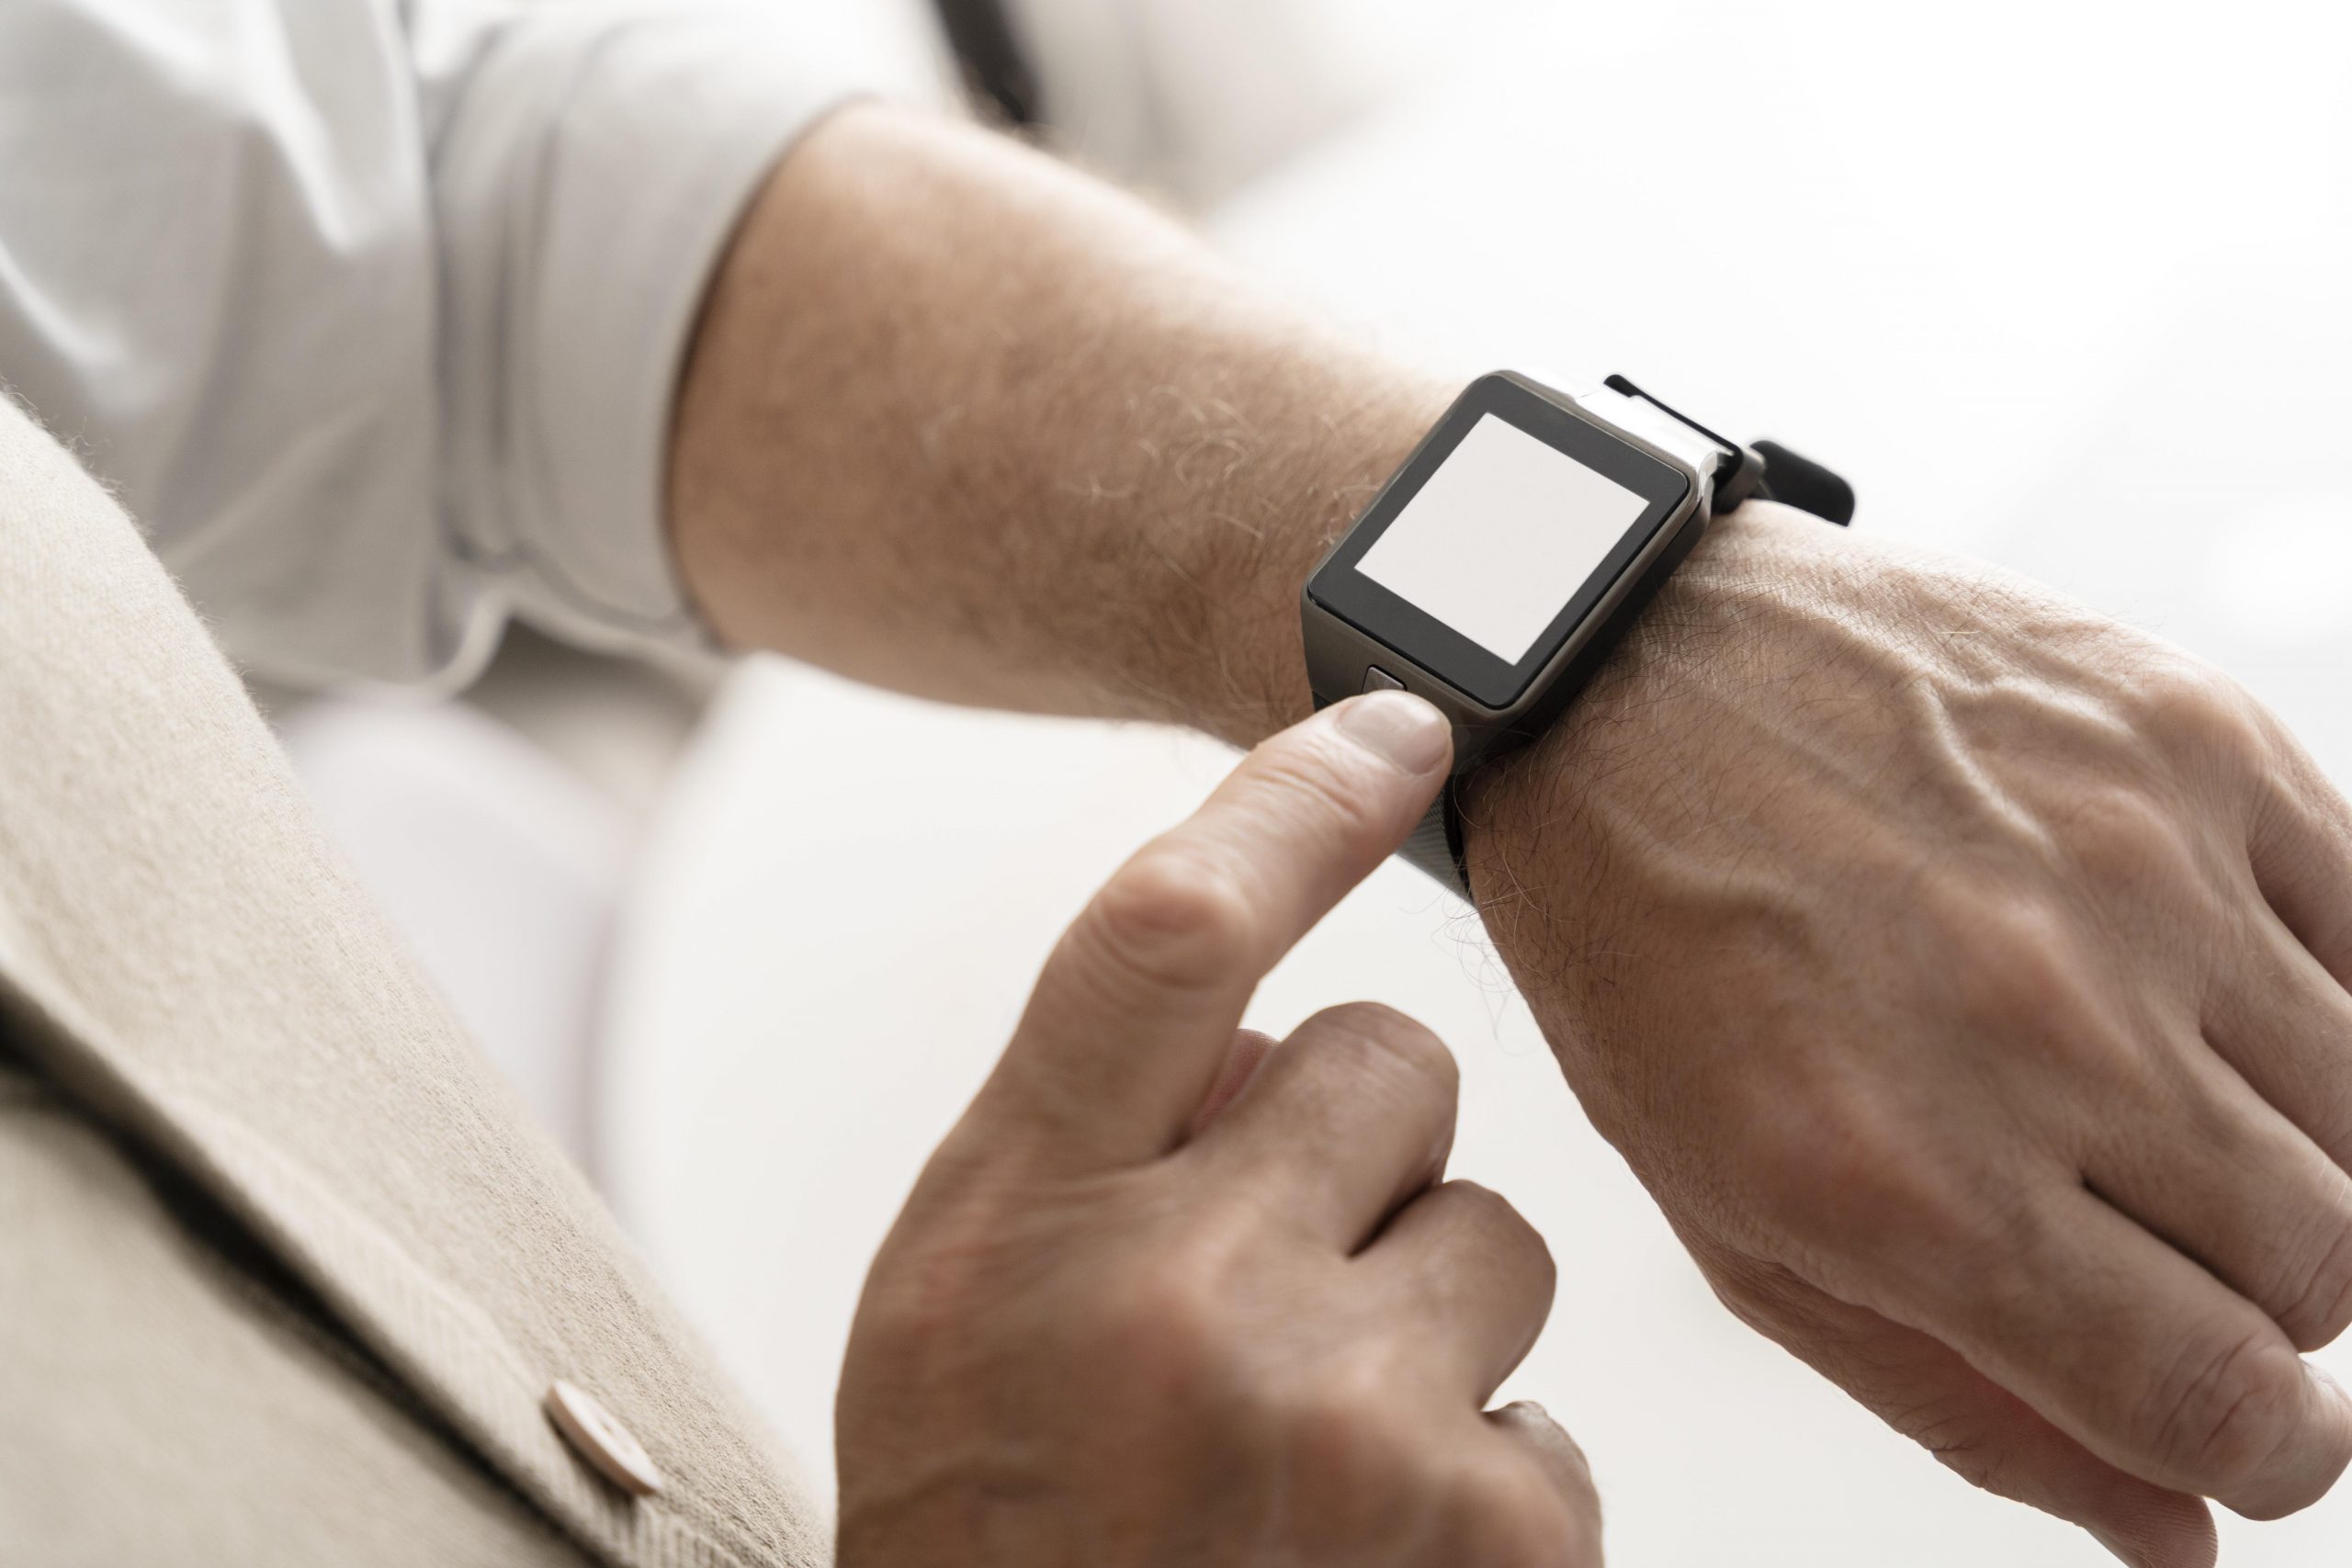 Wearable to detect stress levels